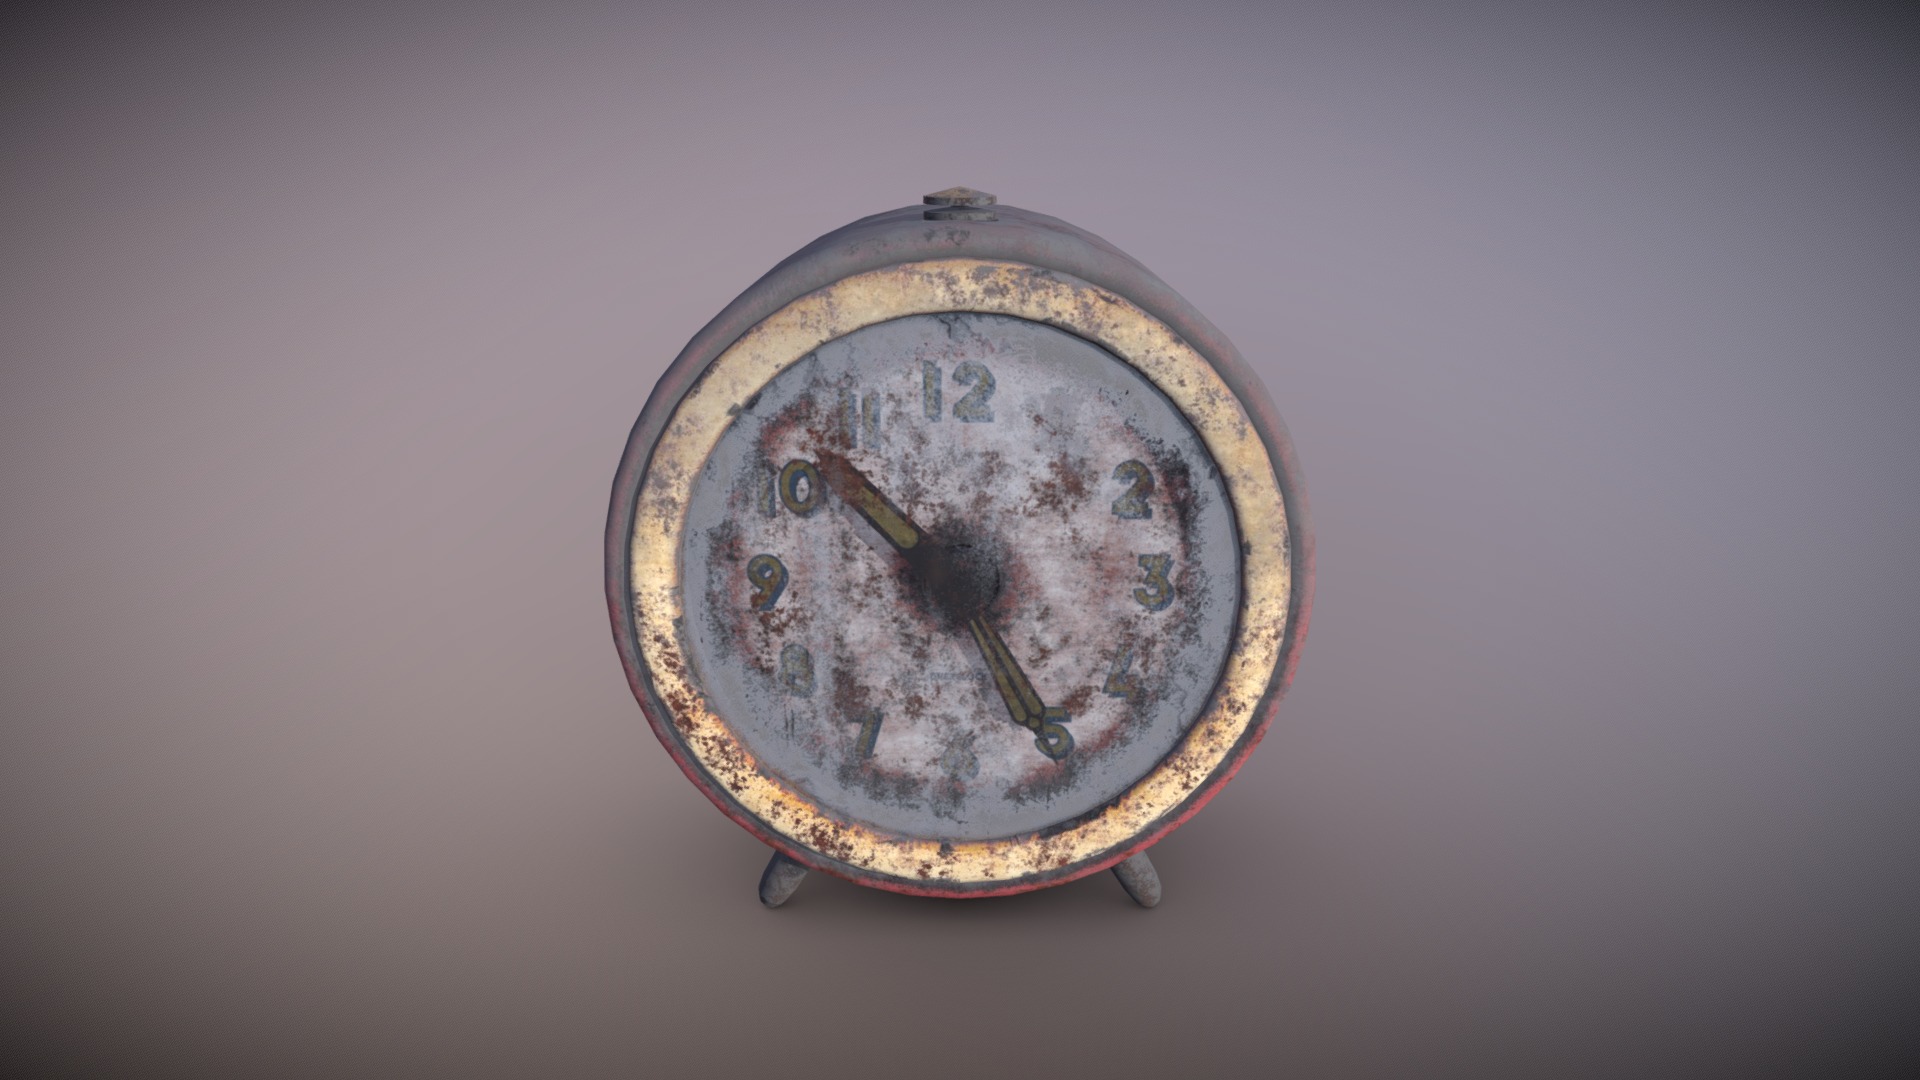 3D model Dirty desktop clock 1 of 20 - This is a 3D model of the Dirty desktop clock 1 of 20. The 3D model is about a silver analog watch.